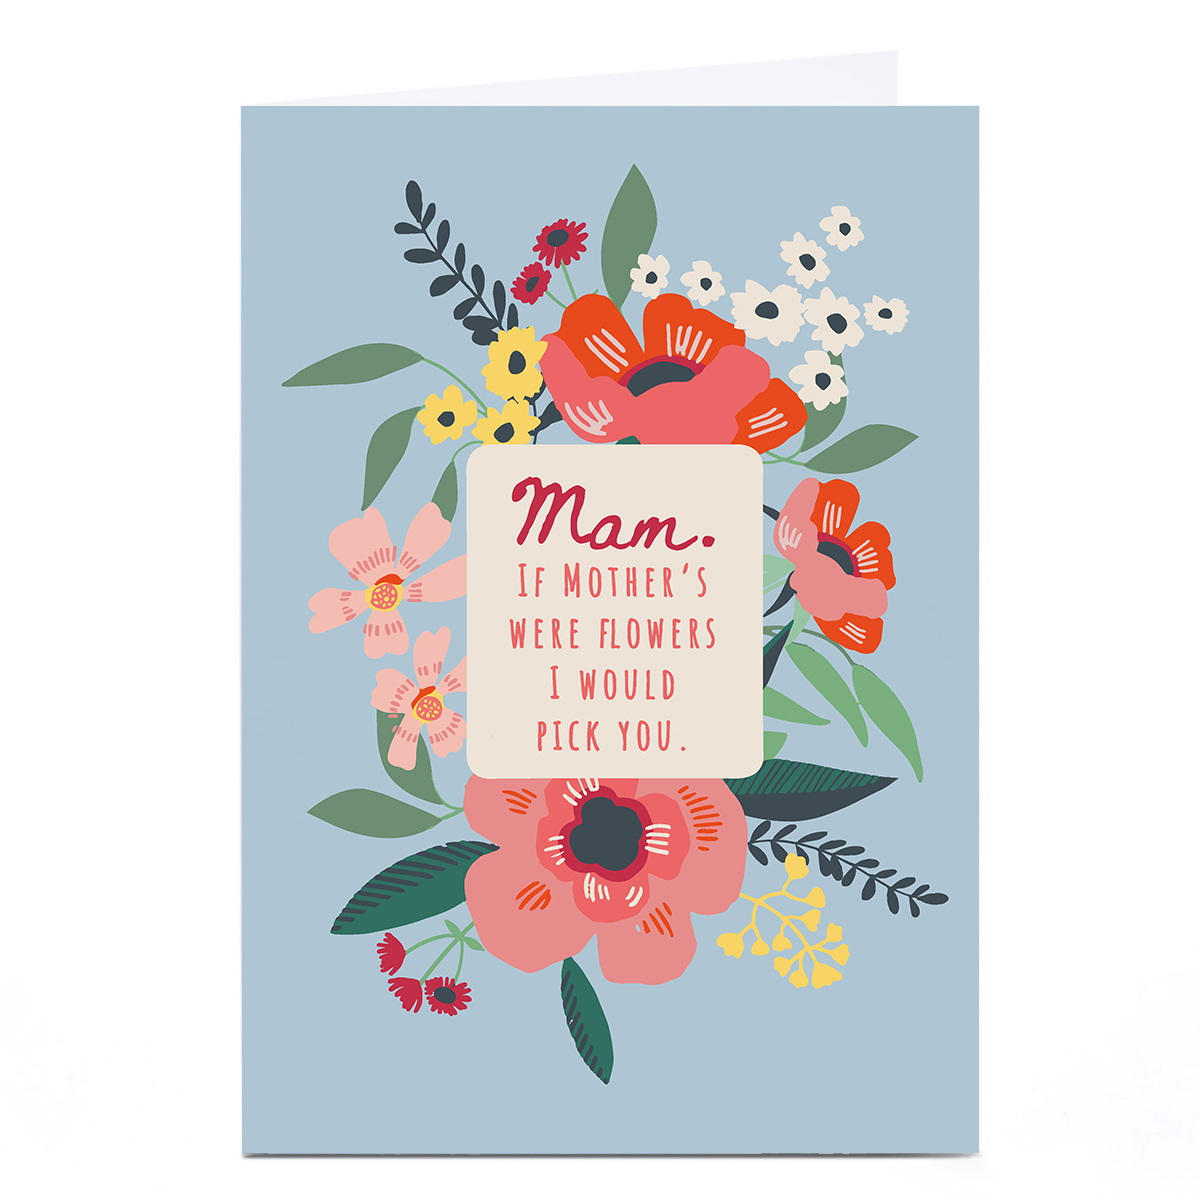 Personalised Bev Hopwood Mother's Day Card - Pick You, Mam